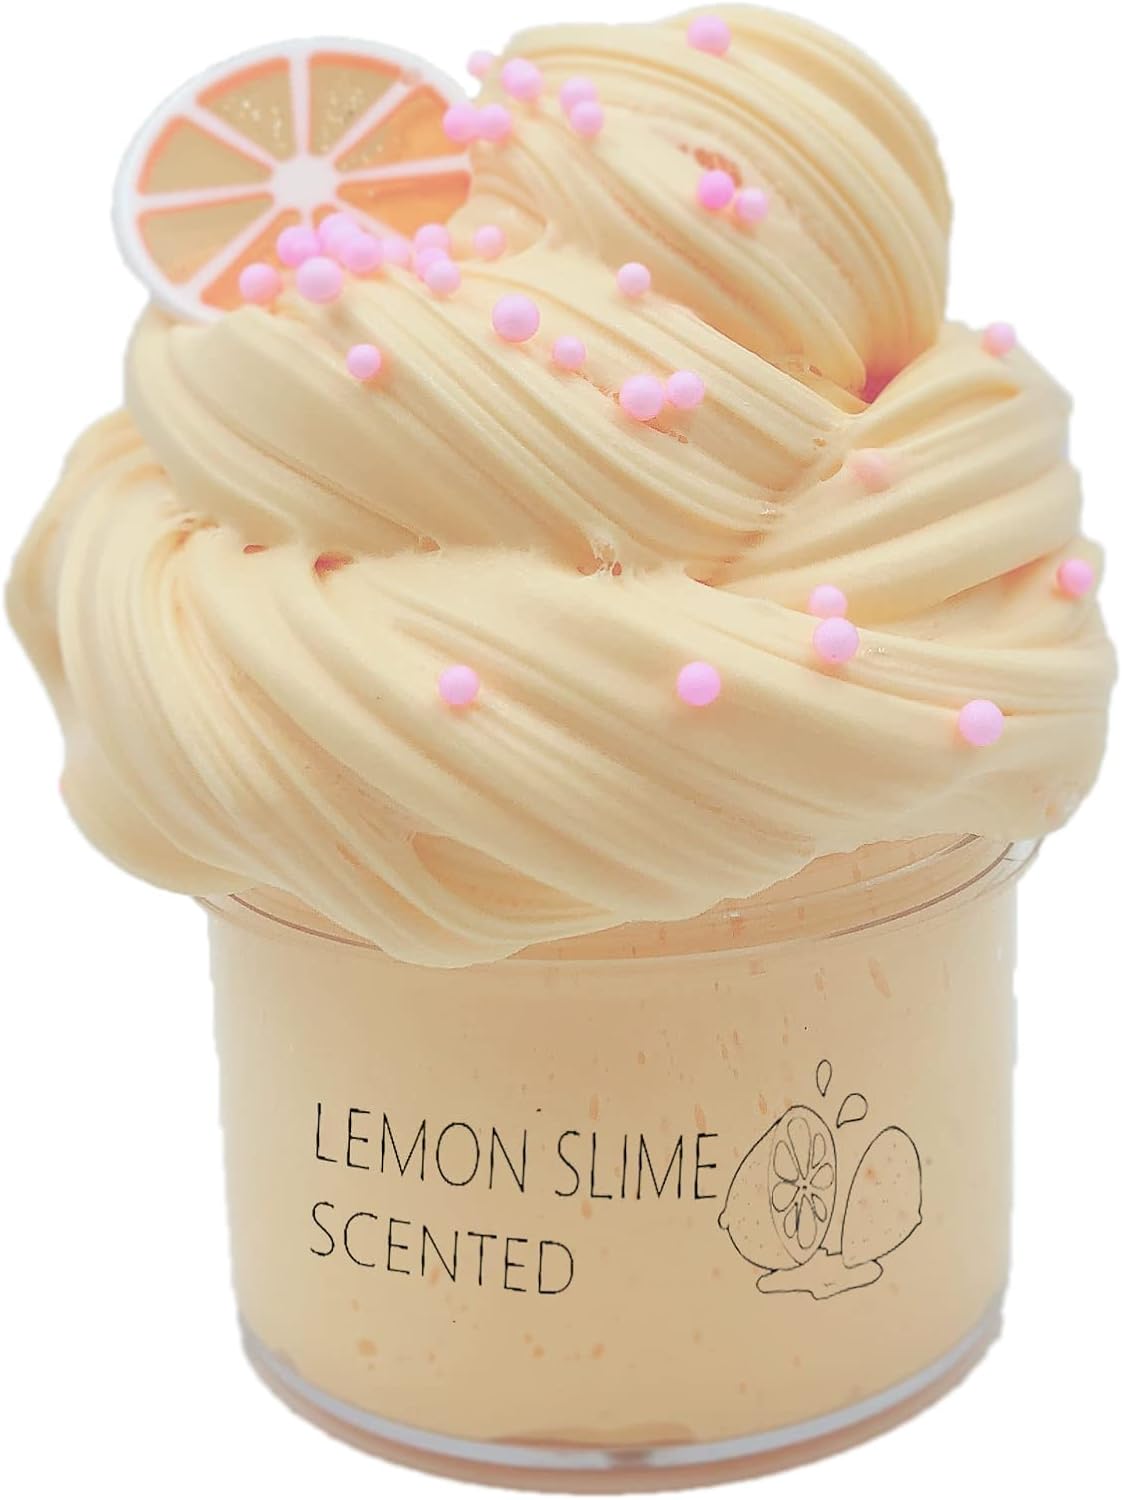 Fluffy Butter Slime, Scented Stretchy Lemon Slime, Super Soft and Non-Sticky